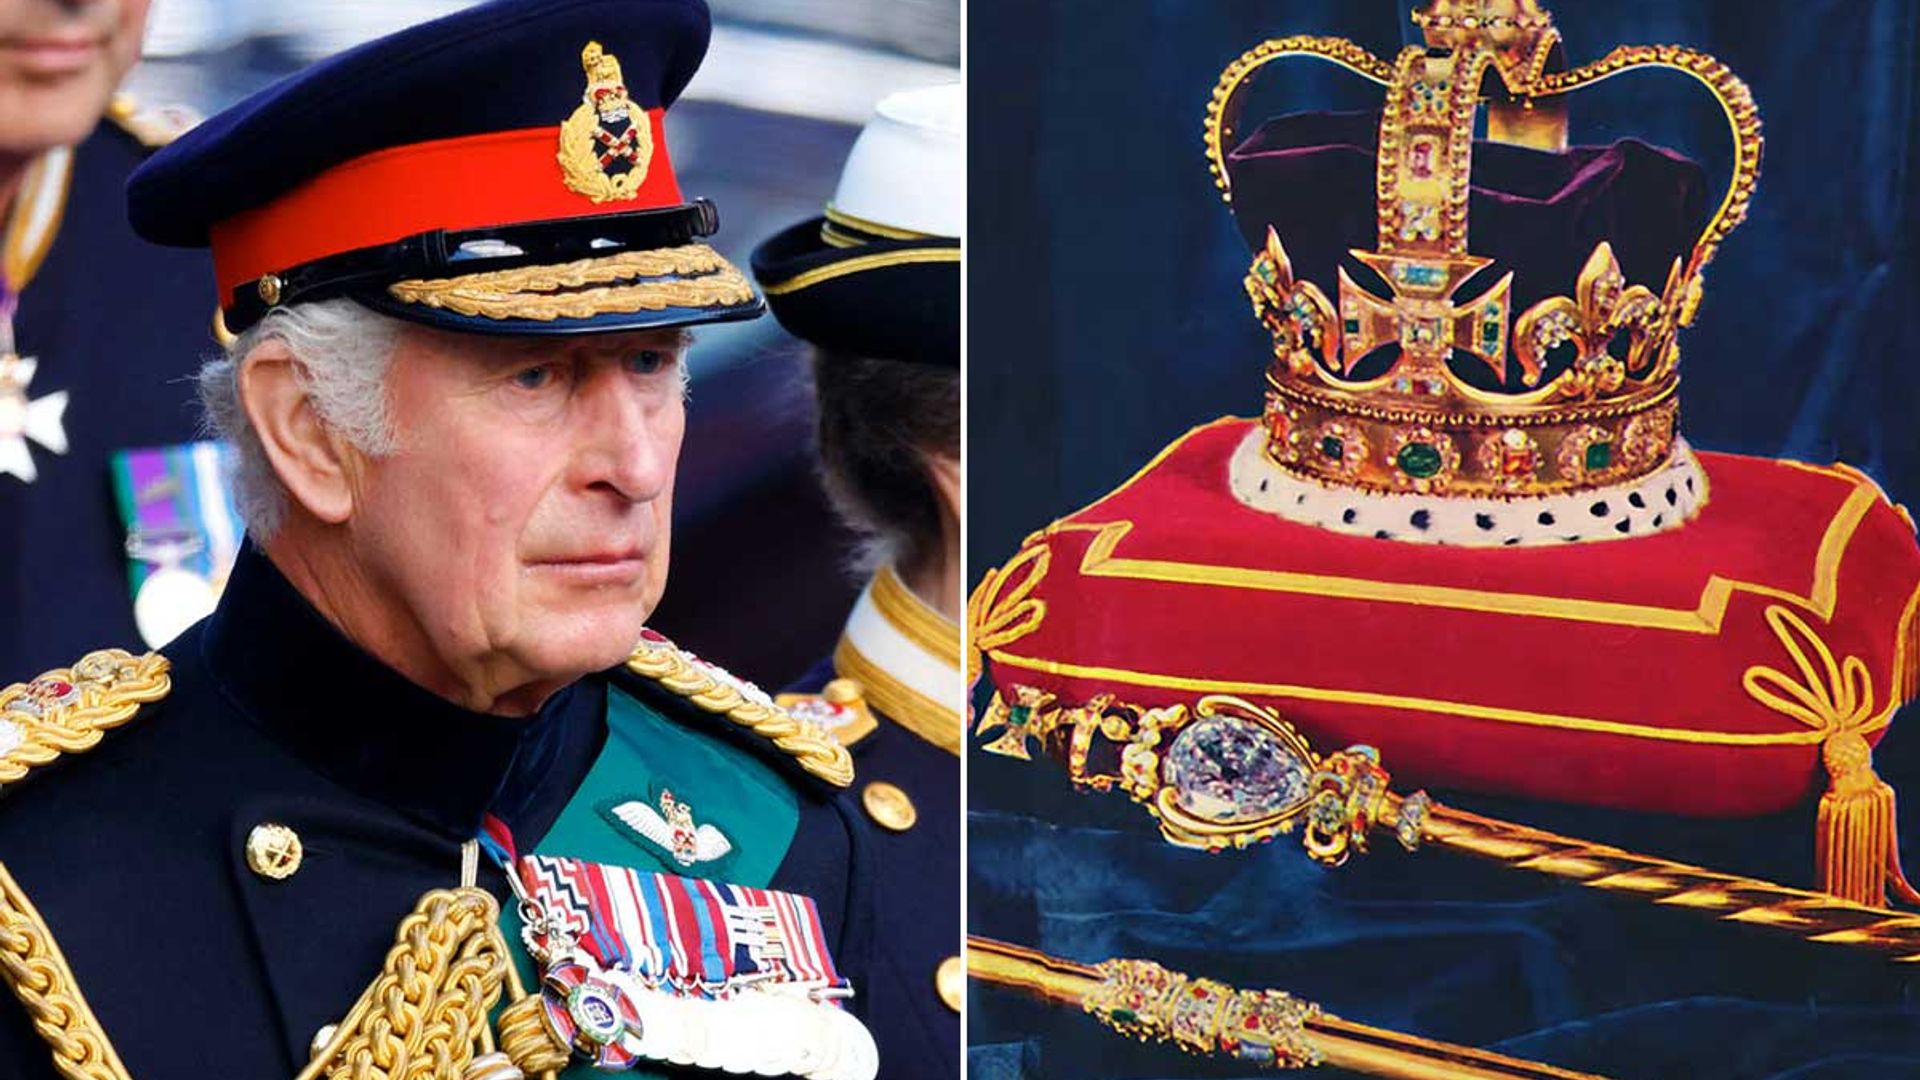 will-king-charles-iii-wear-the-same-crown-as-the-queen-at-his